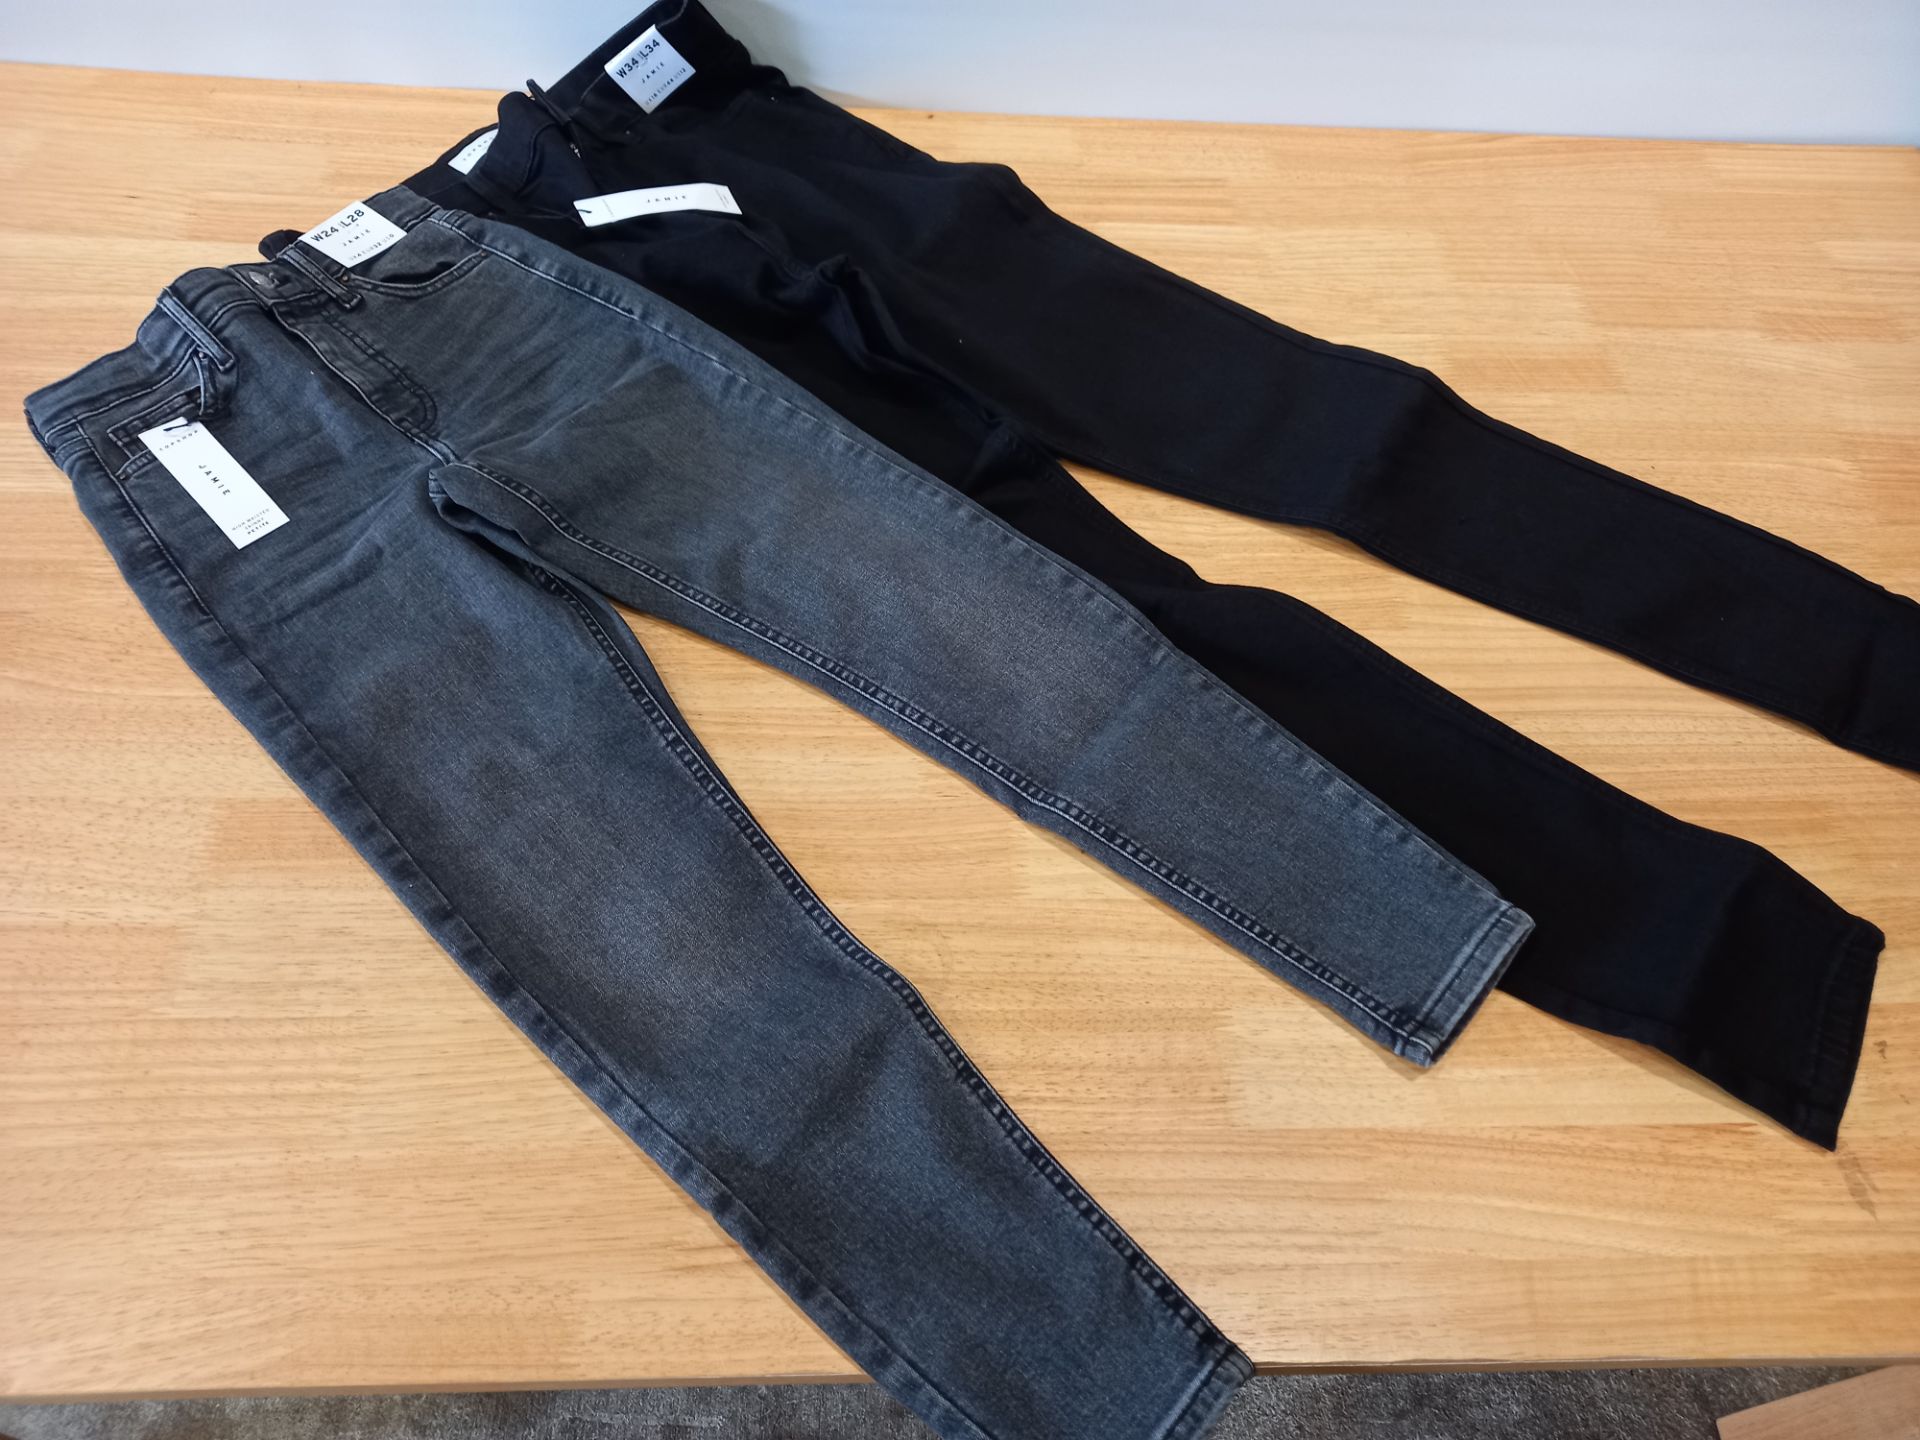 10 PIECE MIXED TOPSHOP JEAN LOT CONTAINING 6 X JAMIE HIGH WAISTED SKINNY PETITE JEANS UK SIZE 4